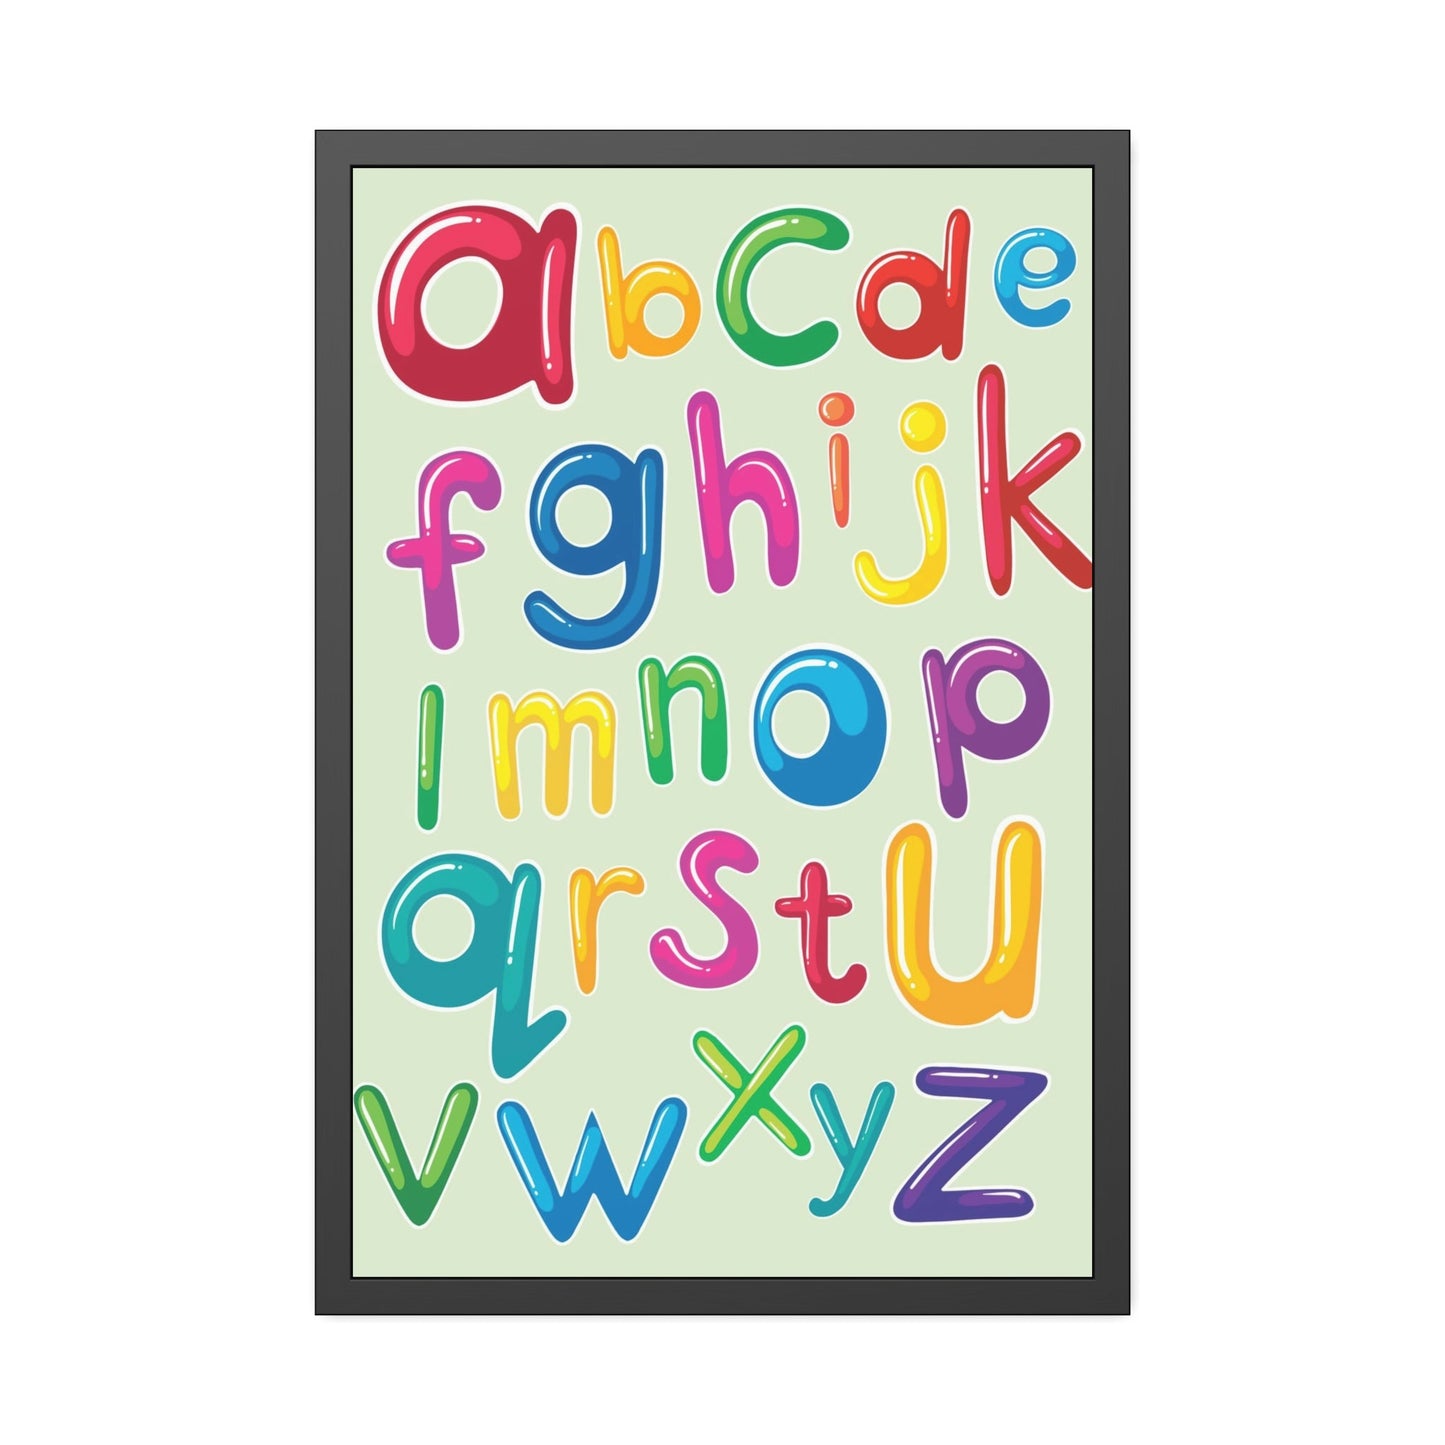 Fun and Whimsical: Colorful Framed Canvas and Posters for Kids' Rooms